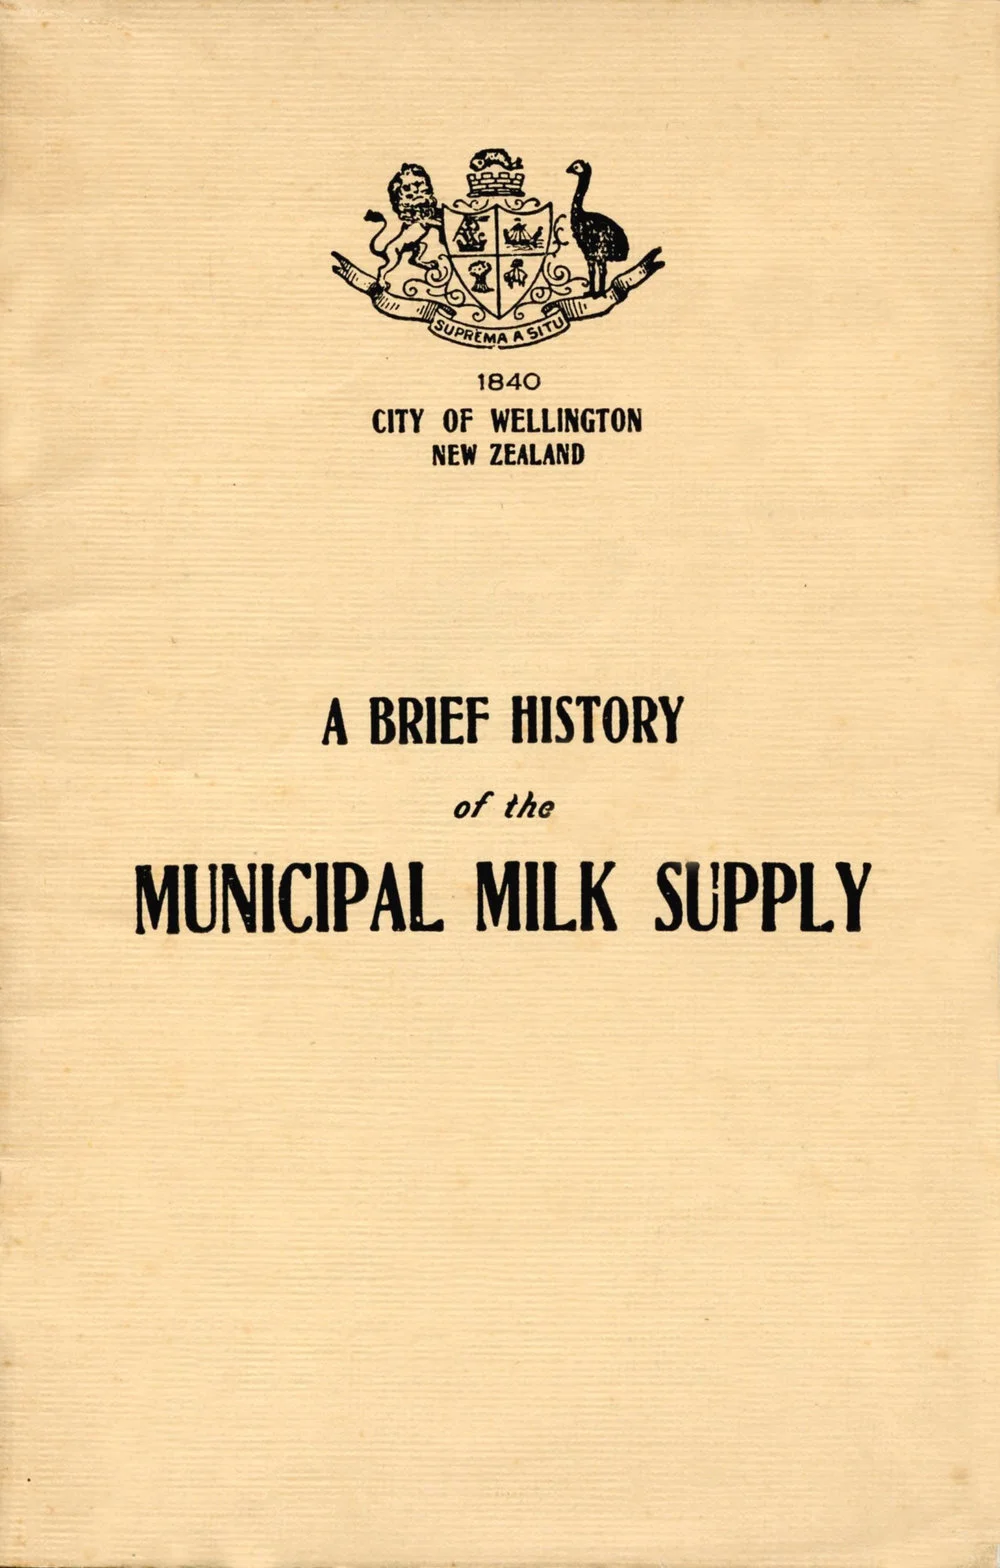 A Brief History of the Municipal Milk Supply